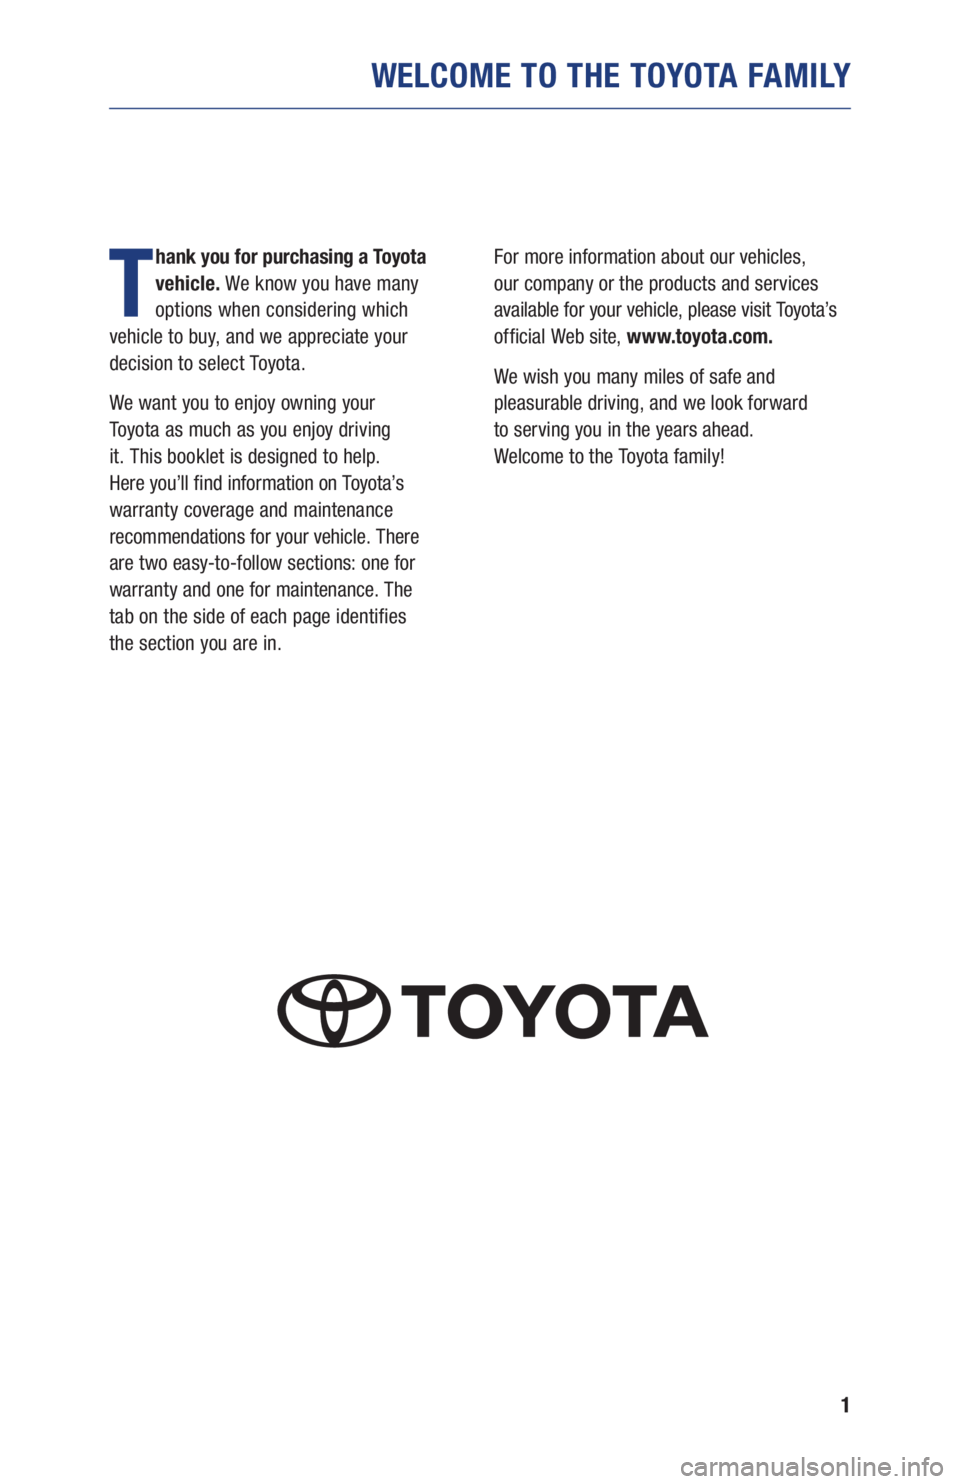 TOYOTA RAV4 HYBRID 2019  Warranties & Maintenance Guides (in English) 1
WELCOME TO THE TOYOTA FAMILY
T
hank you for purchasing a Toyota 
vehicle. We know you have many 
options when considering which  
vehicle to buy, and we appreciate your 
decision to select Toyota.
W